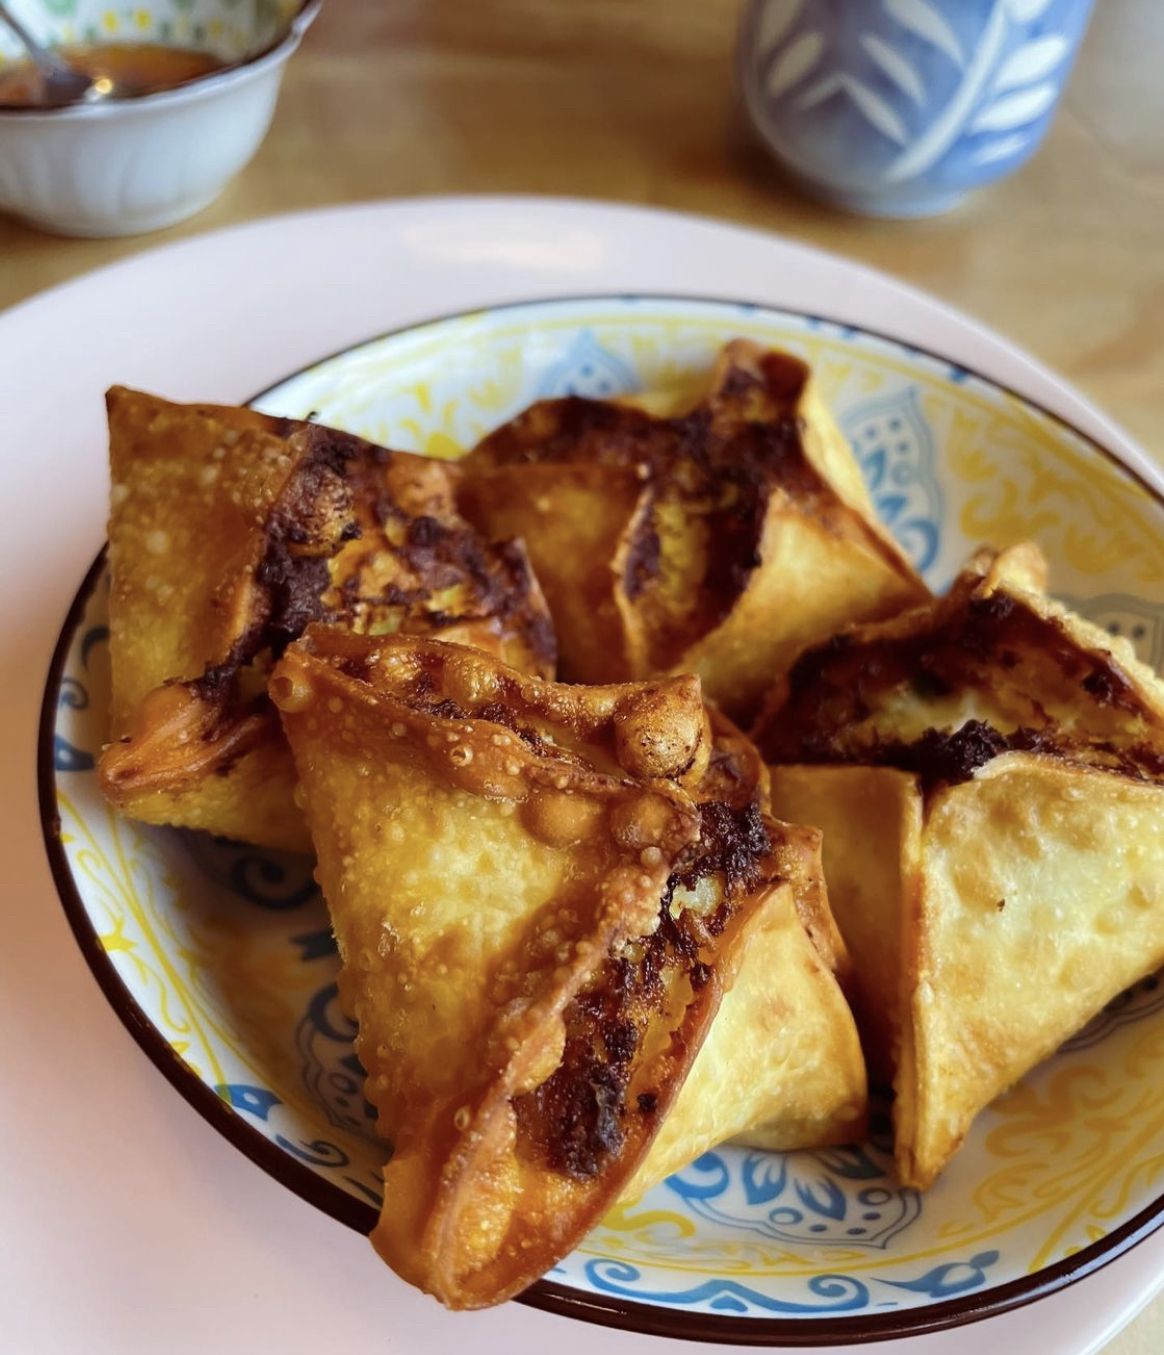 Crab Rangoons from Rukdiew Cafe via IG (Photo by @FlavorMoth)